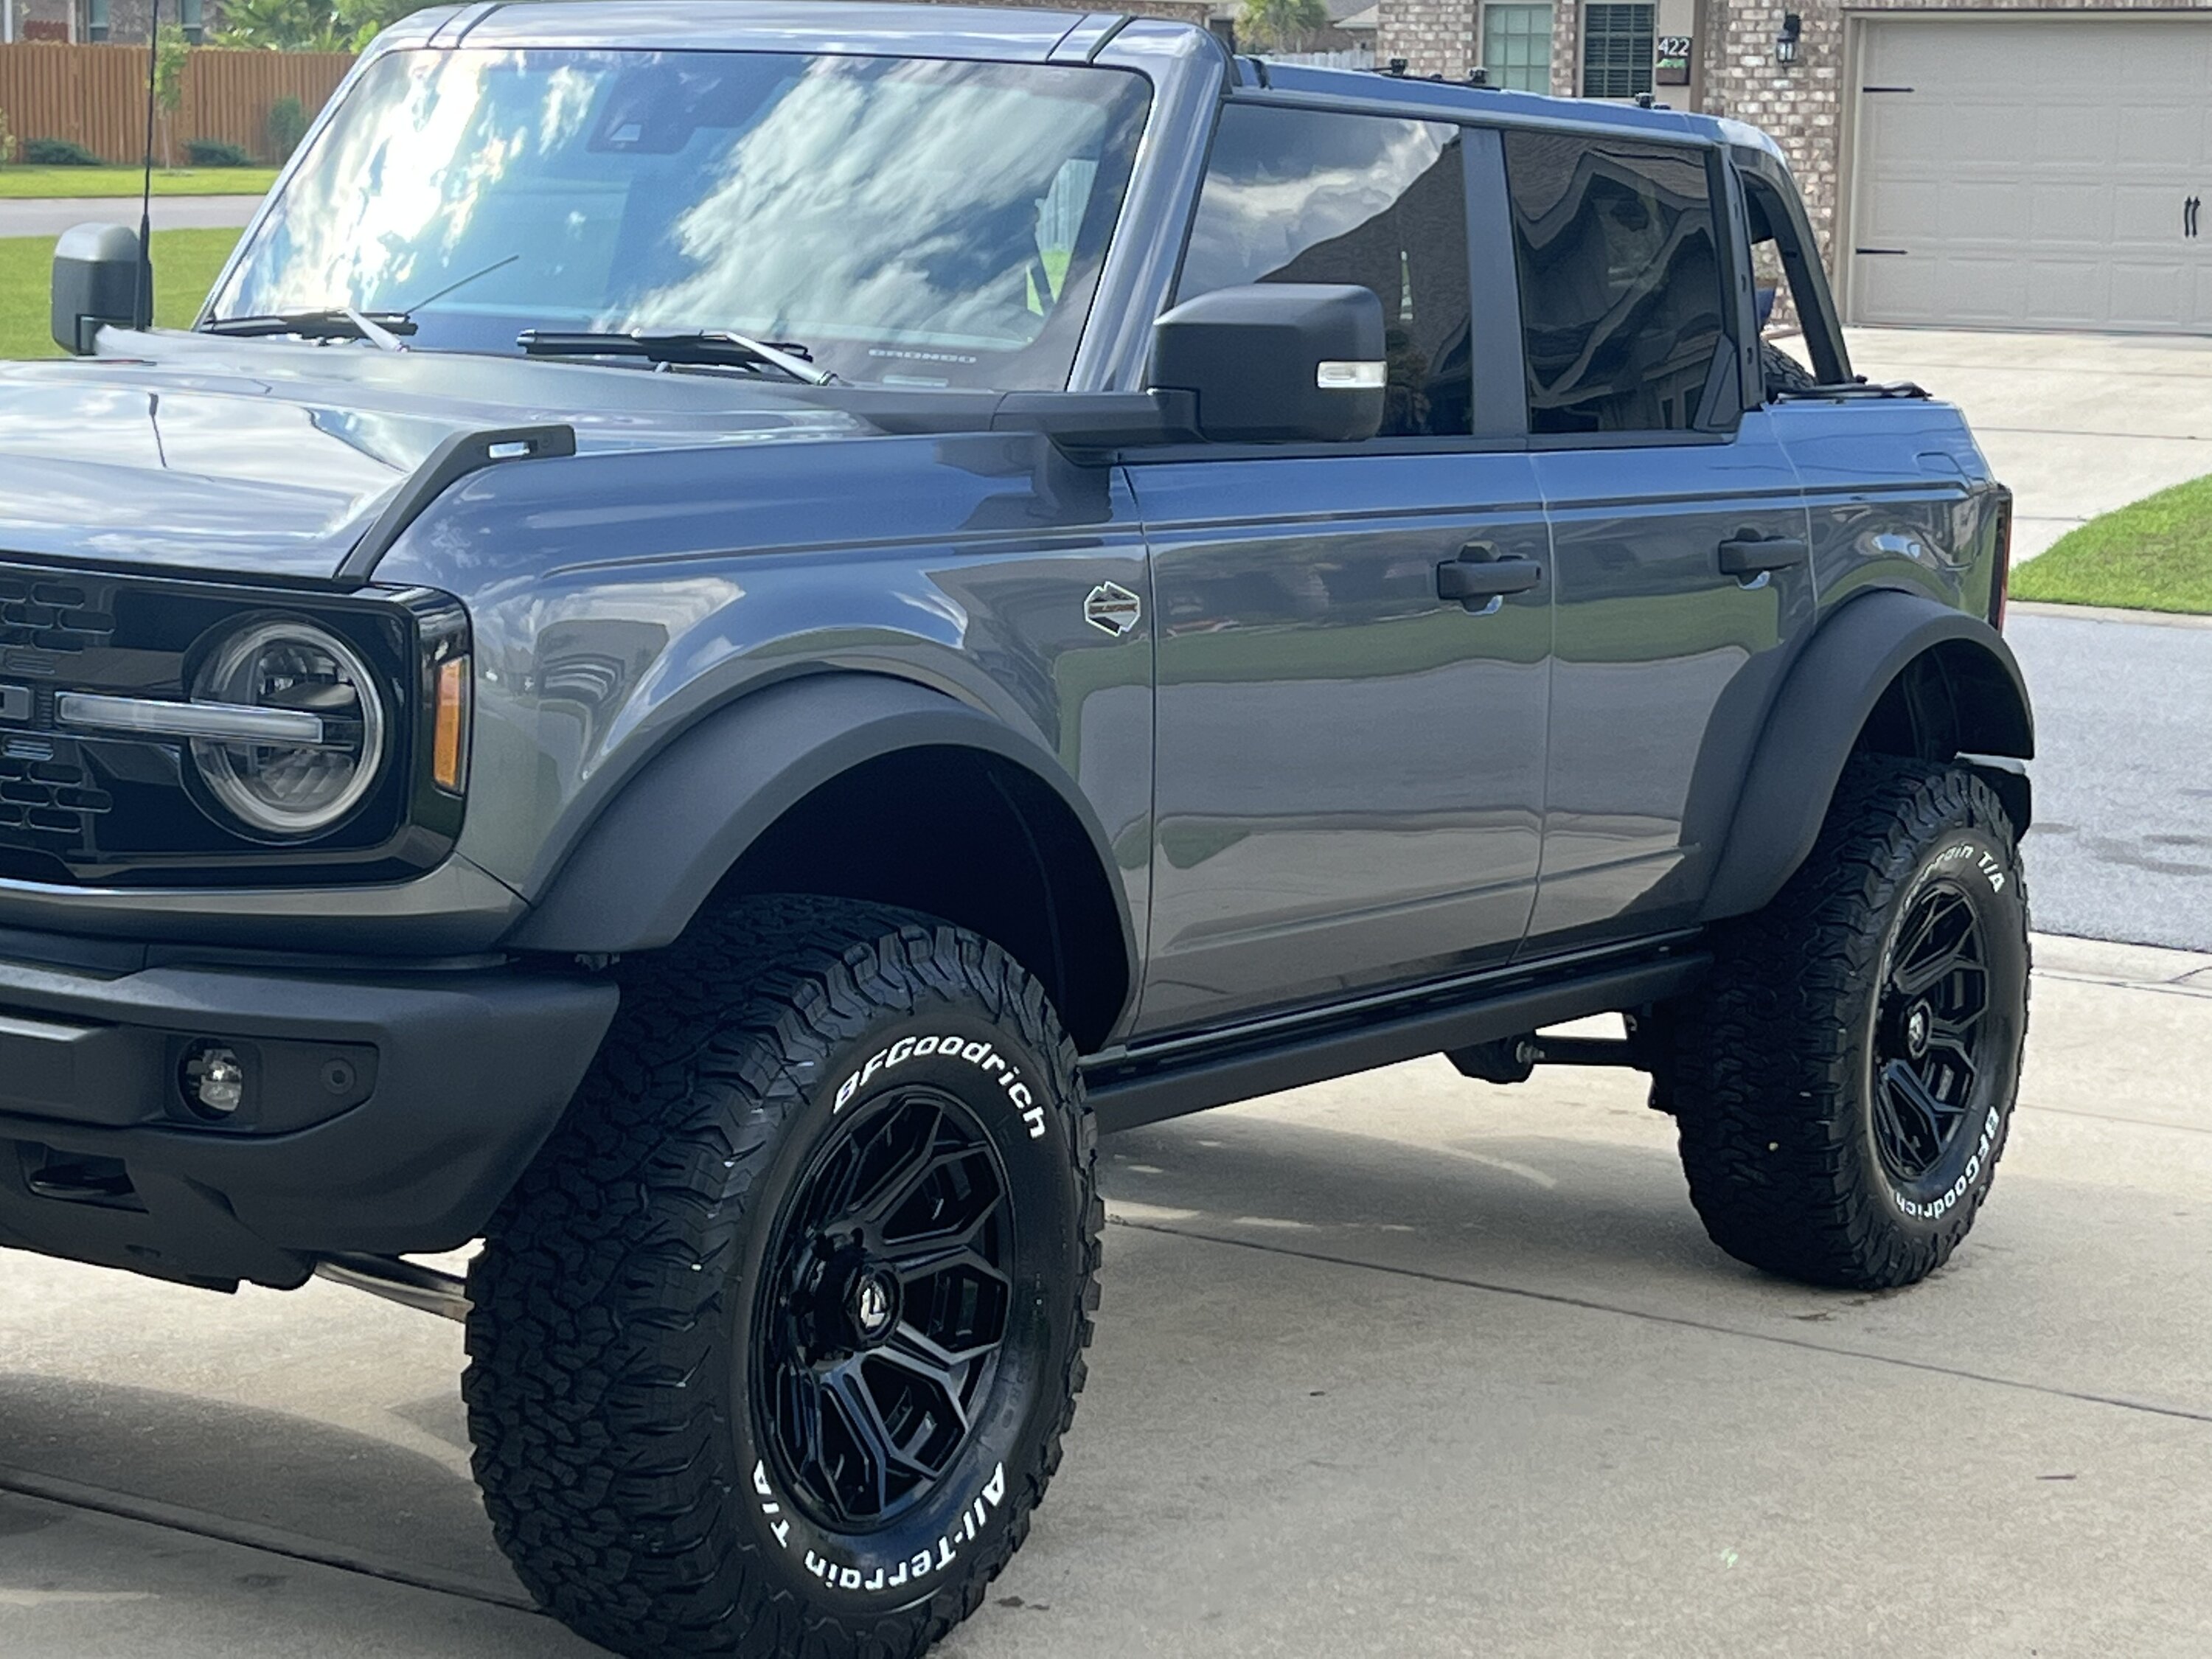 Ford Bronco Show us your installed wheel / tire upgrades here! (Pics) 5D54485B-85D8-4550-8A41-4940335EFC35